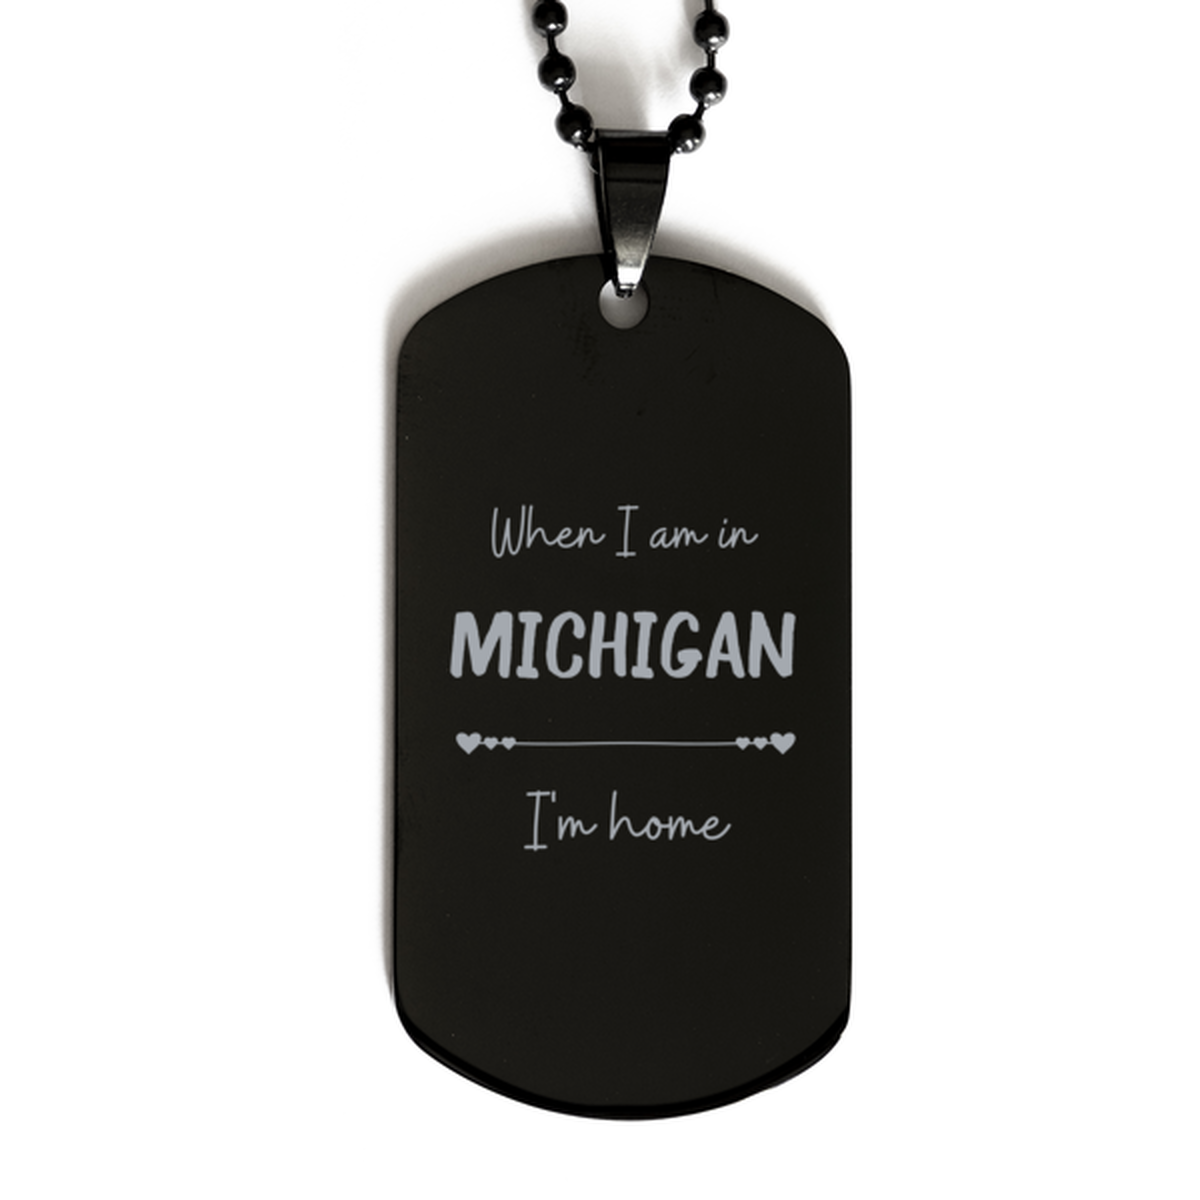 When I am in Michigan I'm home Black Dog Tag, Cheap Gifts For Michigan, State Michigan Birthday Gifts for Friends Coworker